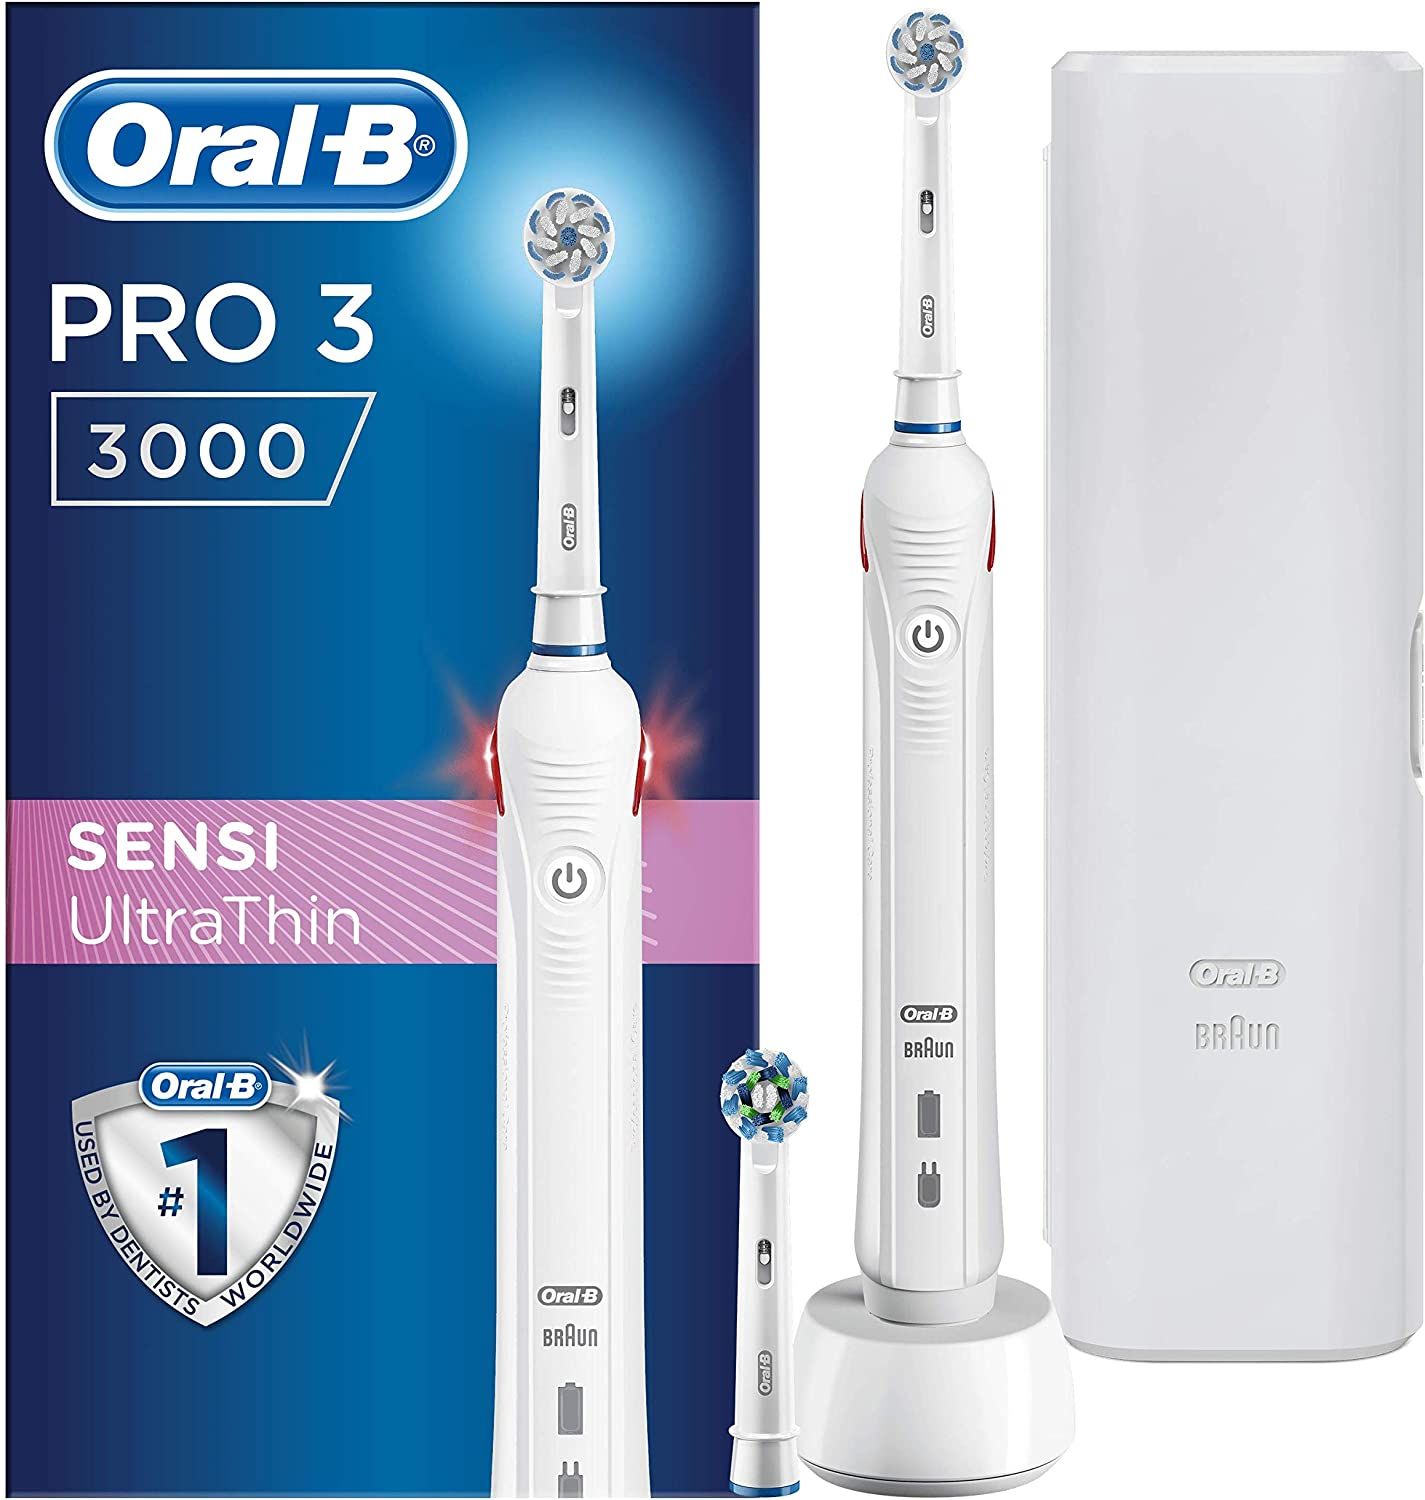 Rechtsaf verdiepen terwijl Oral B's Pro 3000 electric toothbrush price cut on Amazon Prime Day